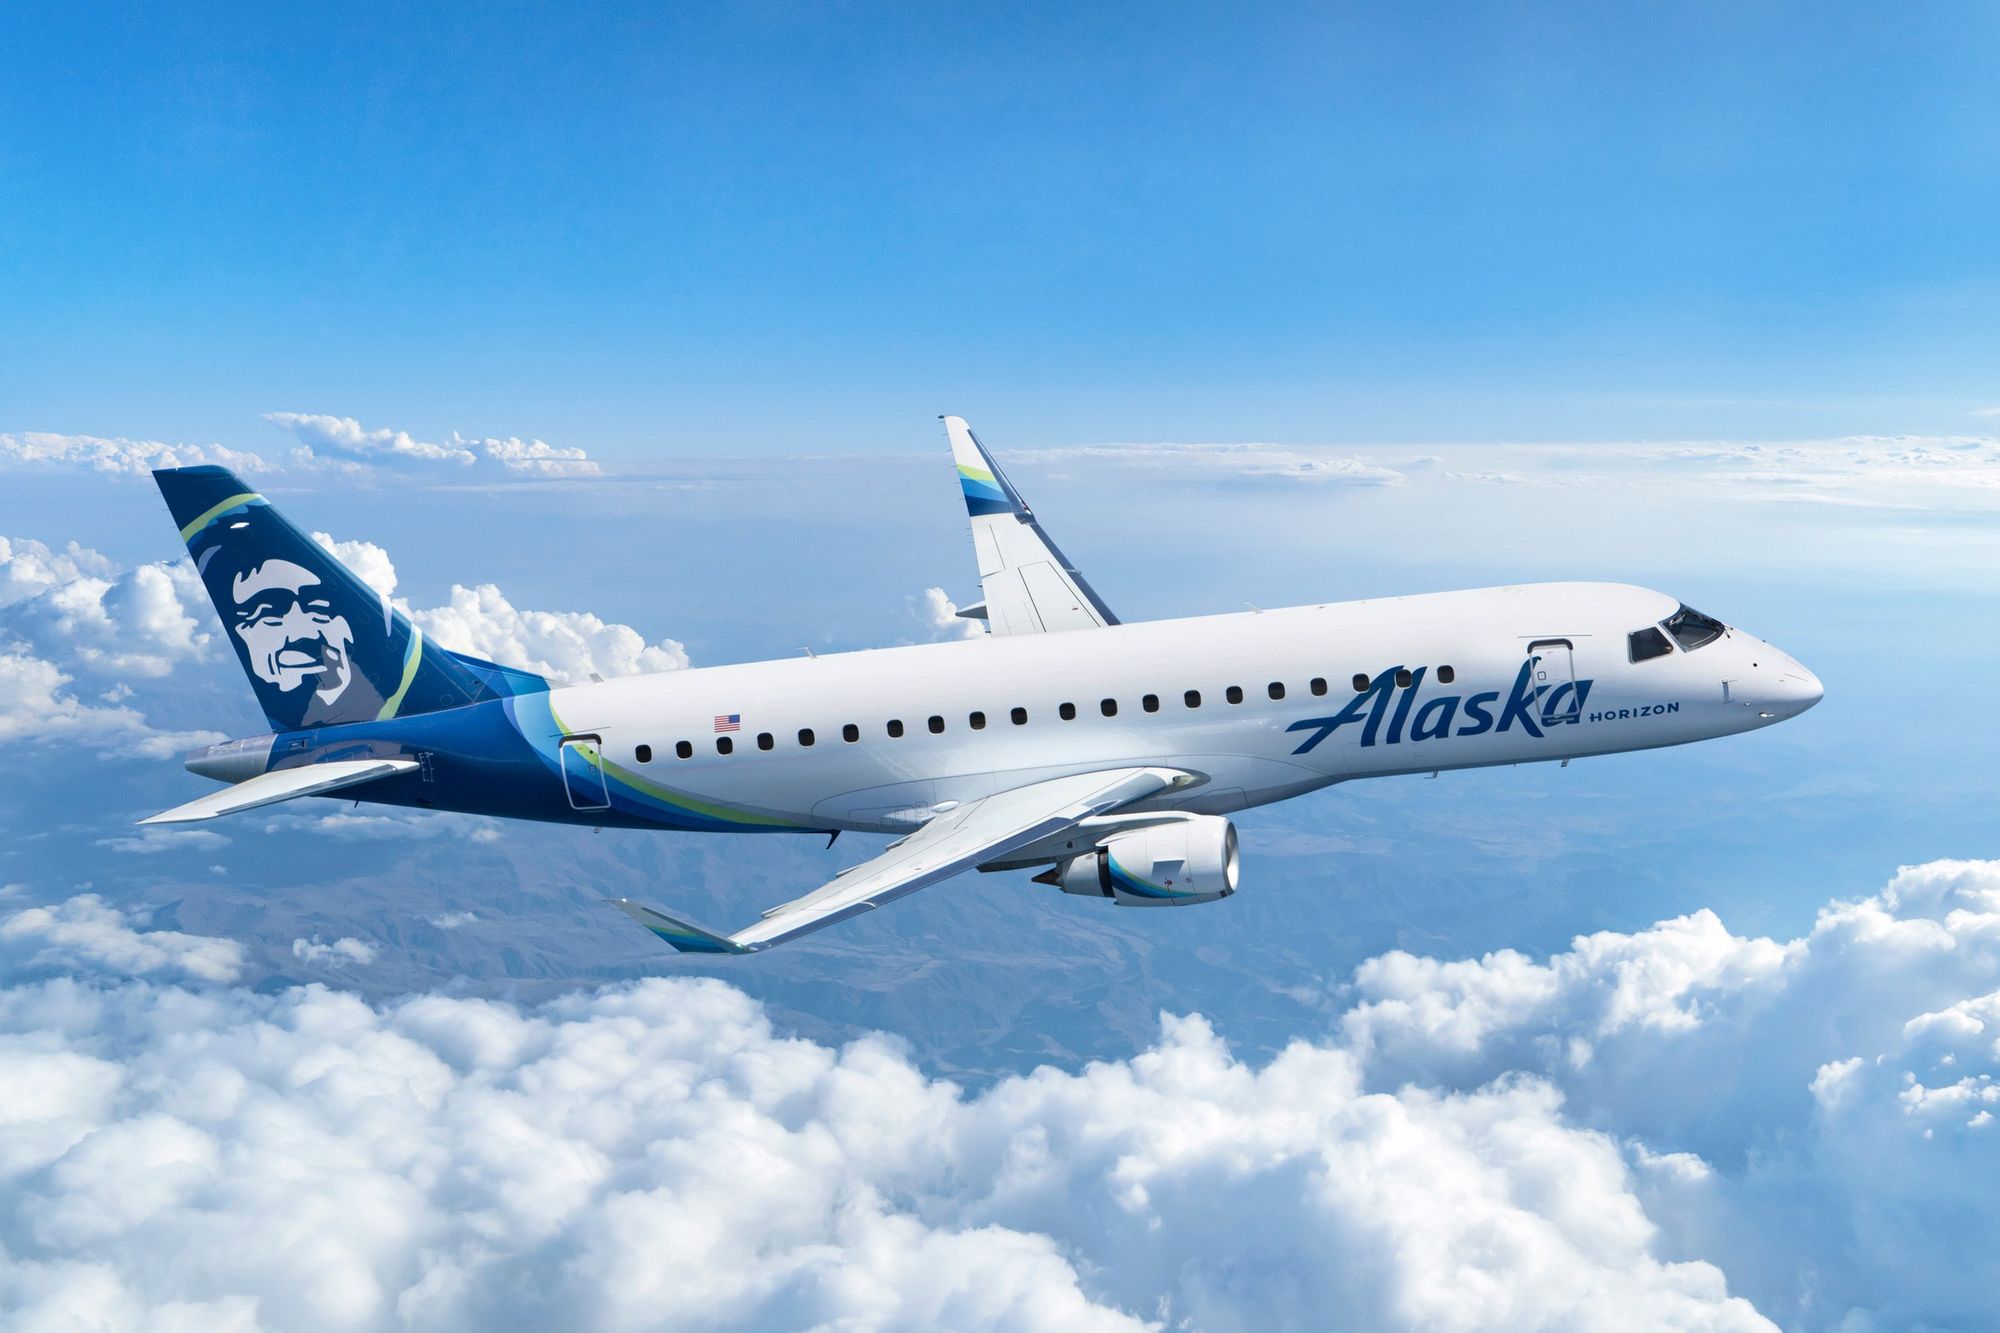 FAA grounds 171 Boeing planes after mid-air blowout on Alaska Airlines jet